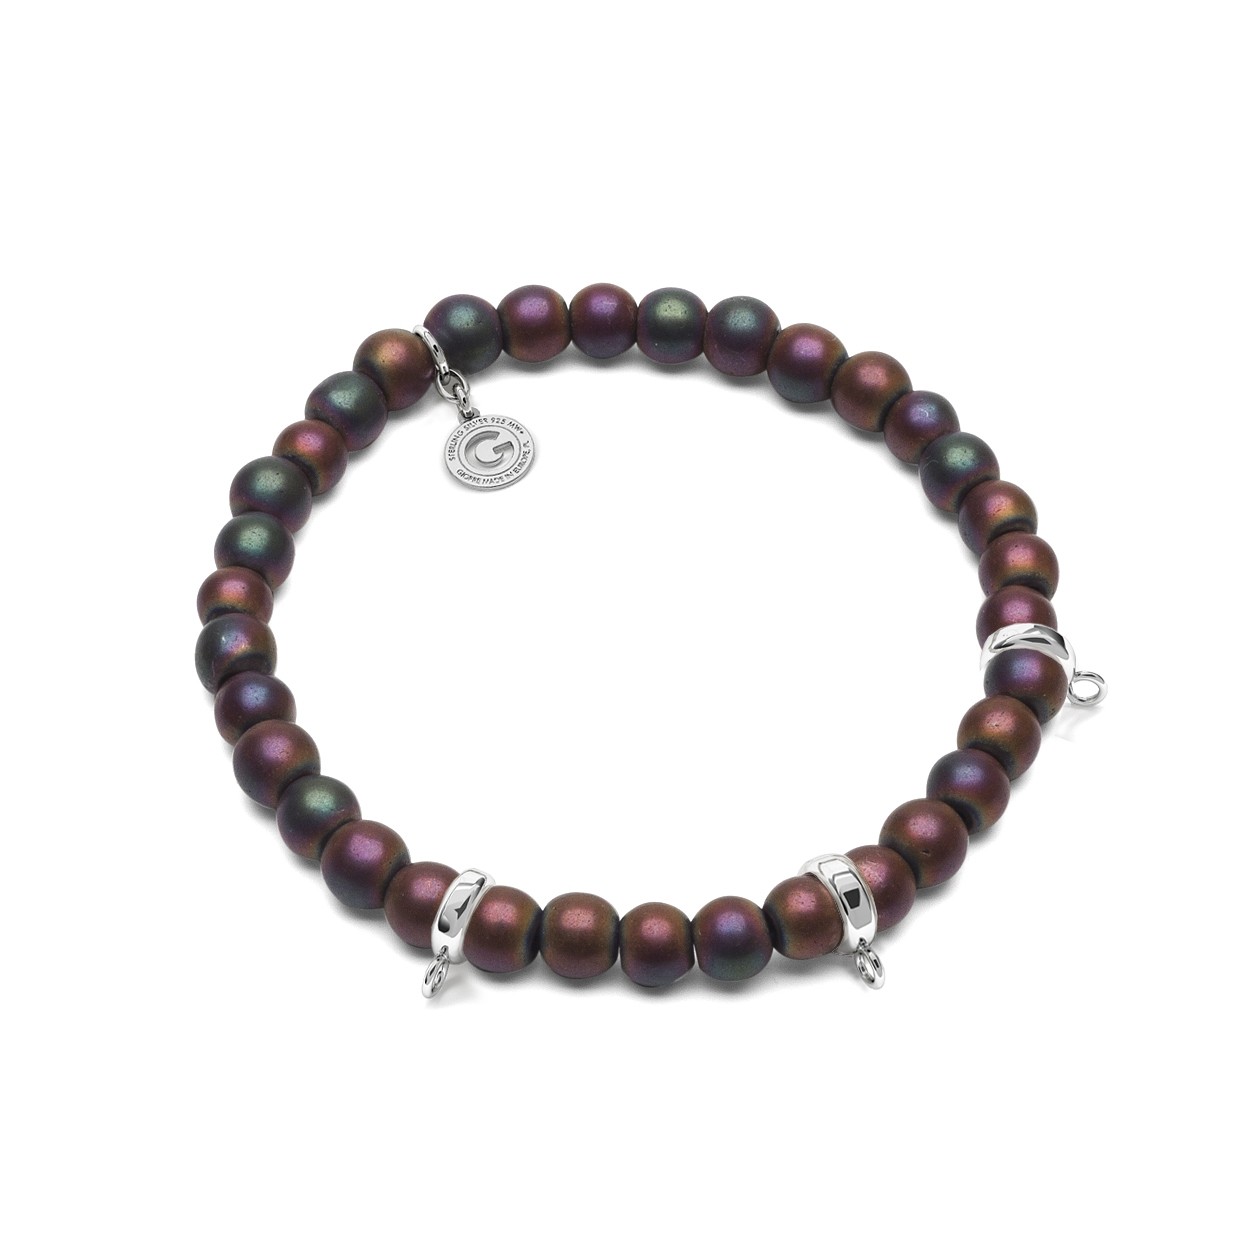 HEMATITE MULTICOLOR, FLEXIBLE BRACELET FOR 3 CHARMS, WITH NATURAL STONES